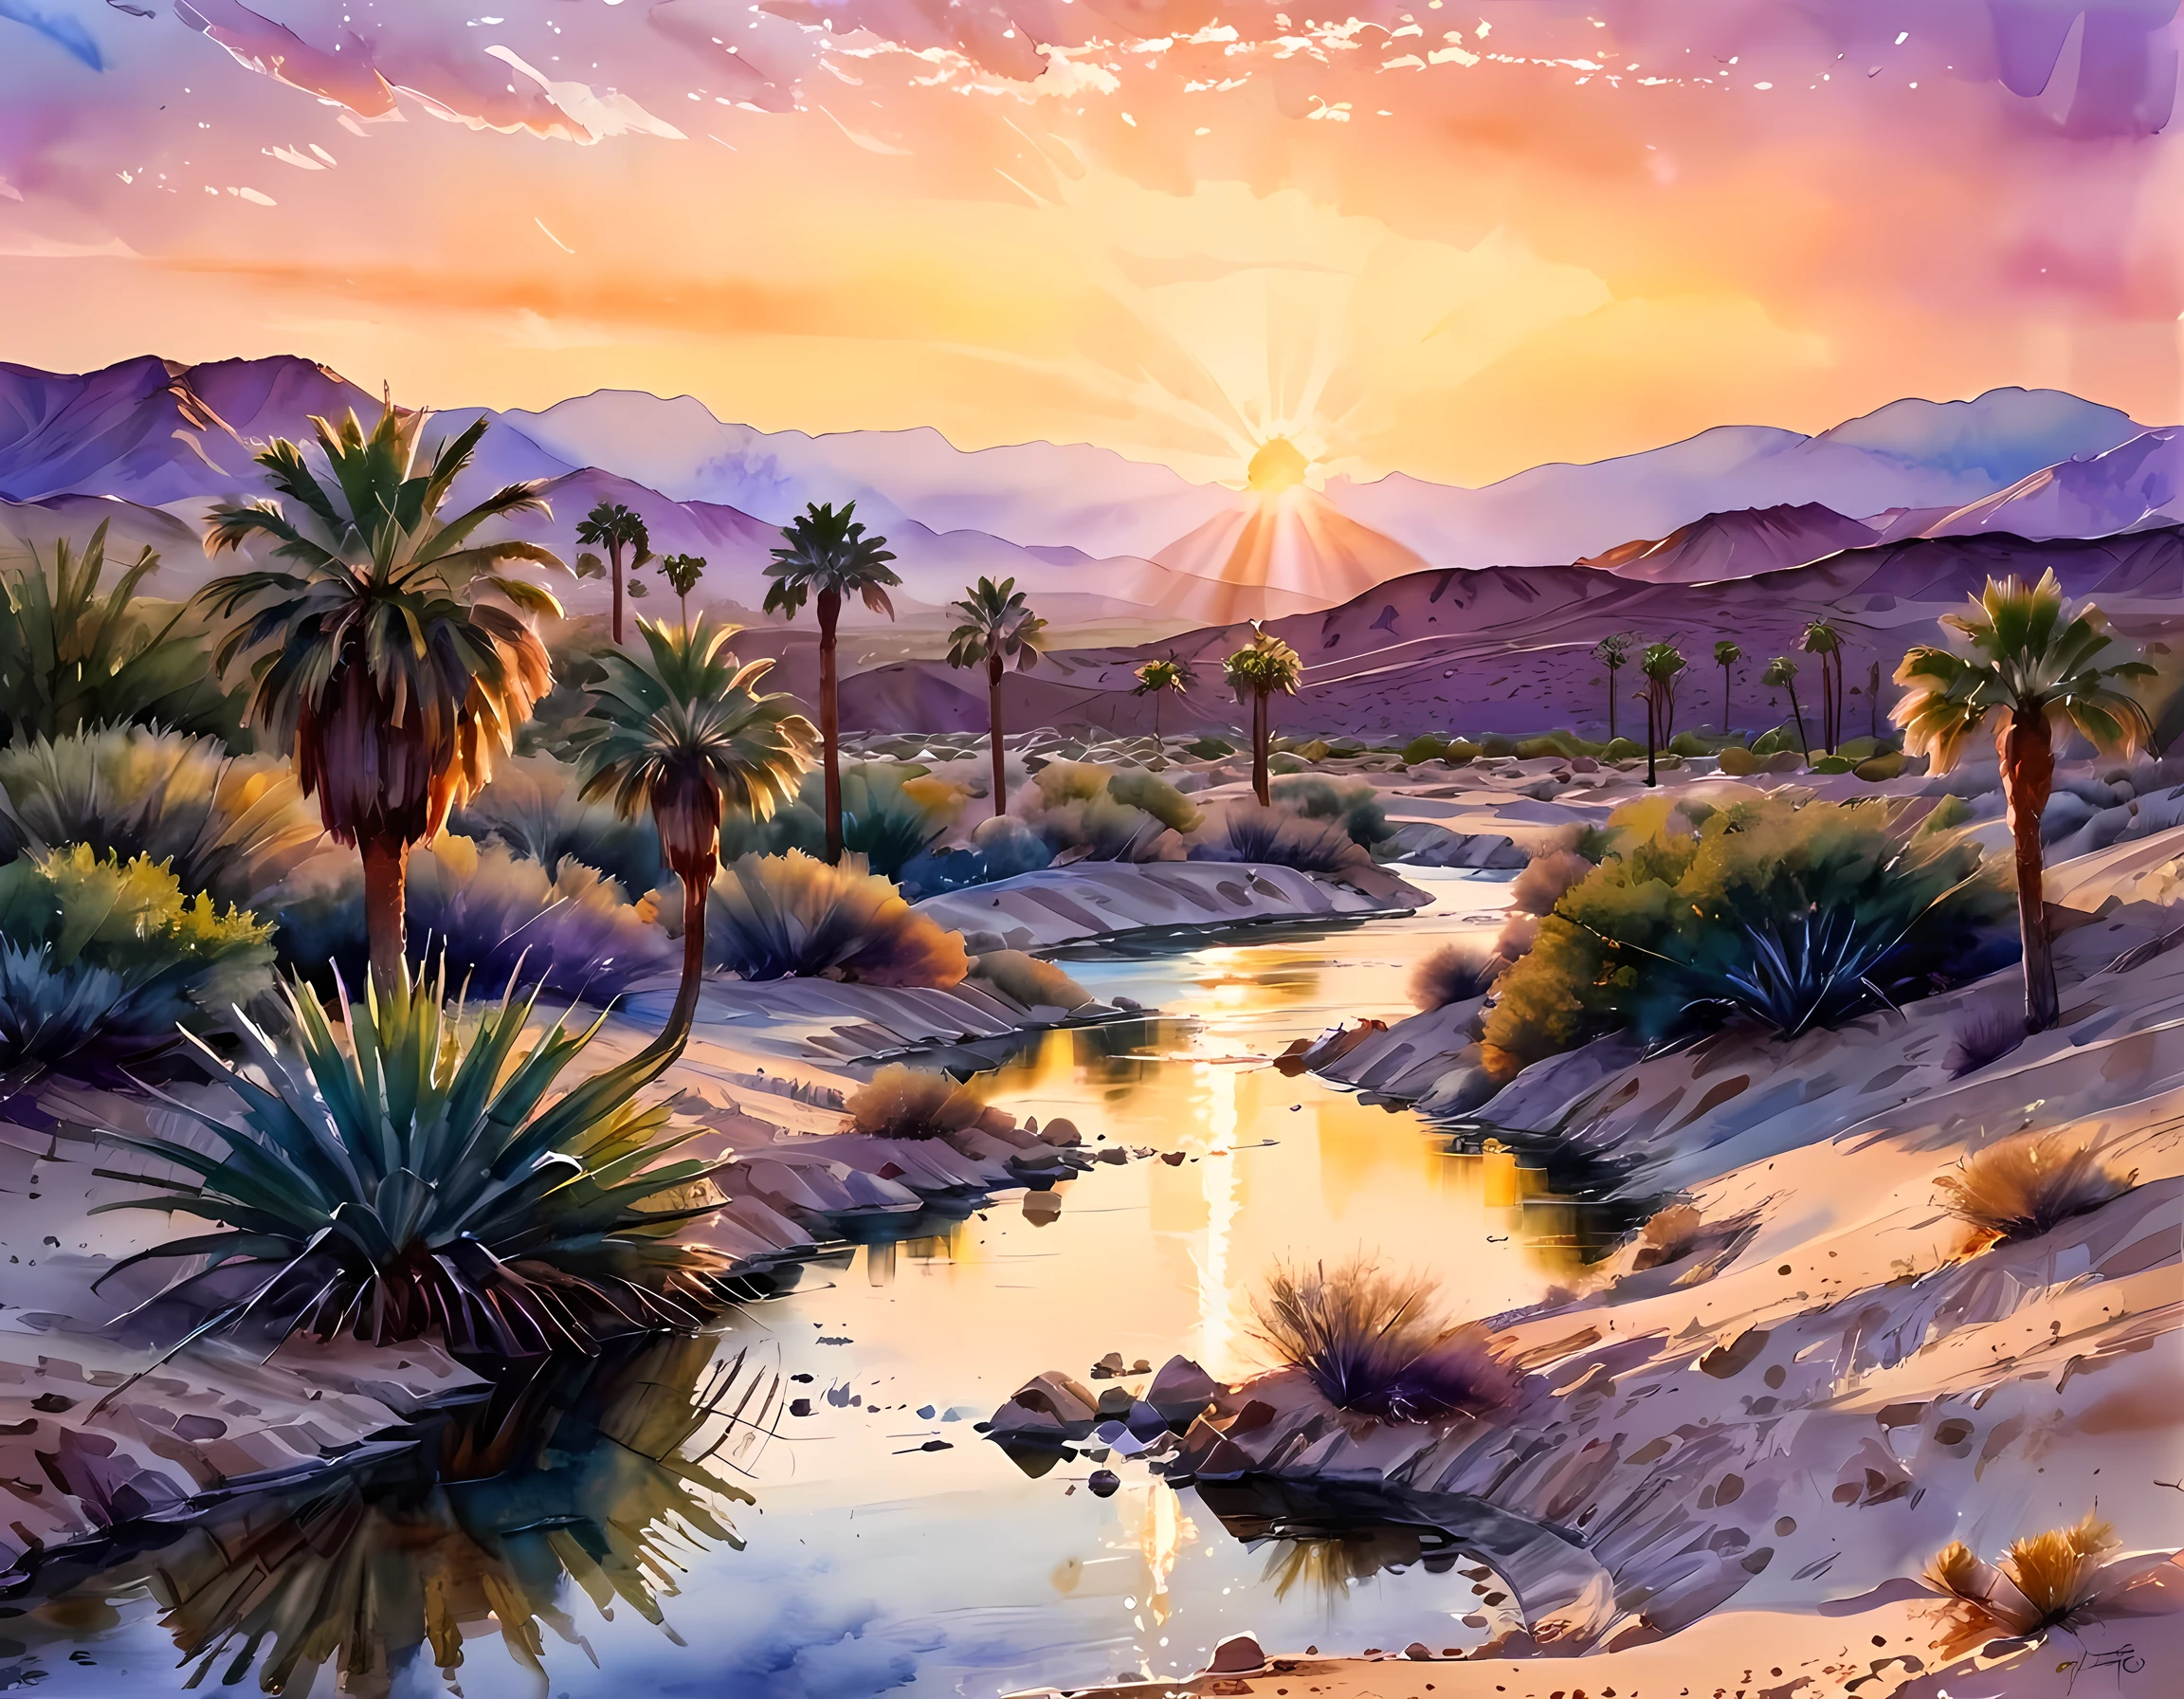 traditional watercolor painting (water color art: 1.5), an award wining, water color art, of an oasis (masterpiece, best detailed, best quality: 1.4) in the desert at sunset, there are some palm trees, and a small spring of water  (masterpiece, best detailed, best quality: 1.4), it is the time between night and day, there are some stars in the sky, and the sun is about to rise, the sky are in shades of, night, yellow and purple, first sun rays of dawn, rolling desert hills in the background, dynamic range, ultra wide shot, photorealism, depth of field, hyper realistic